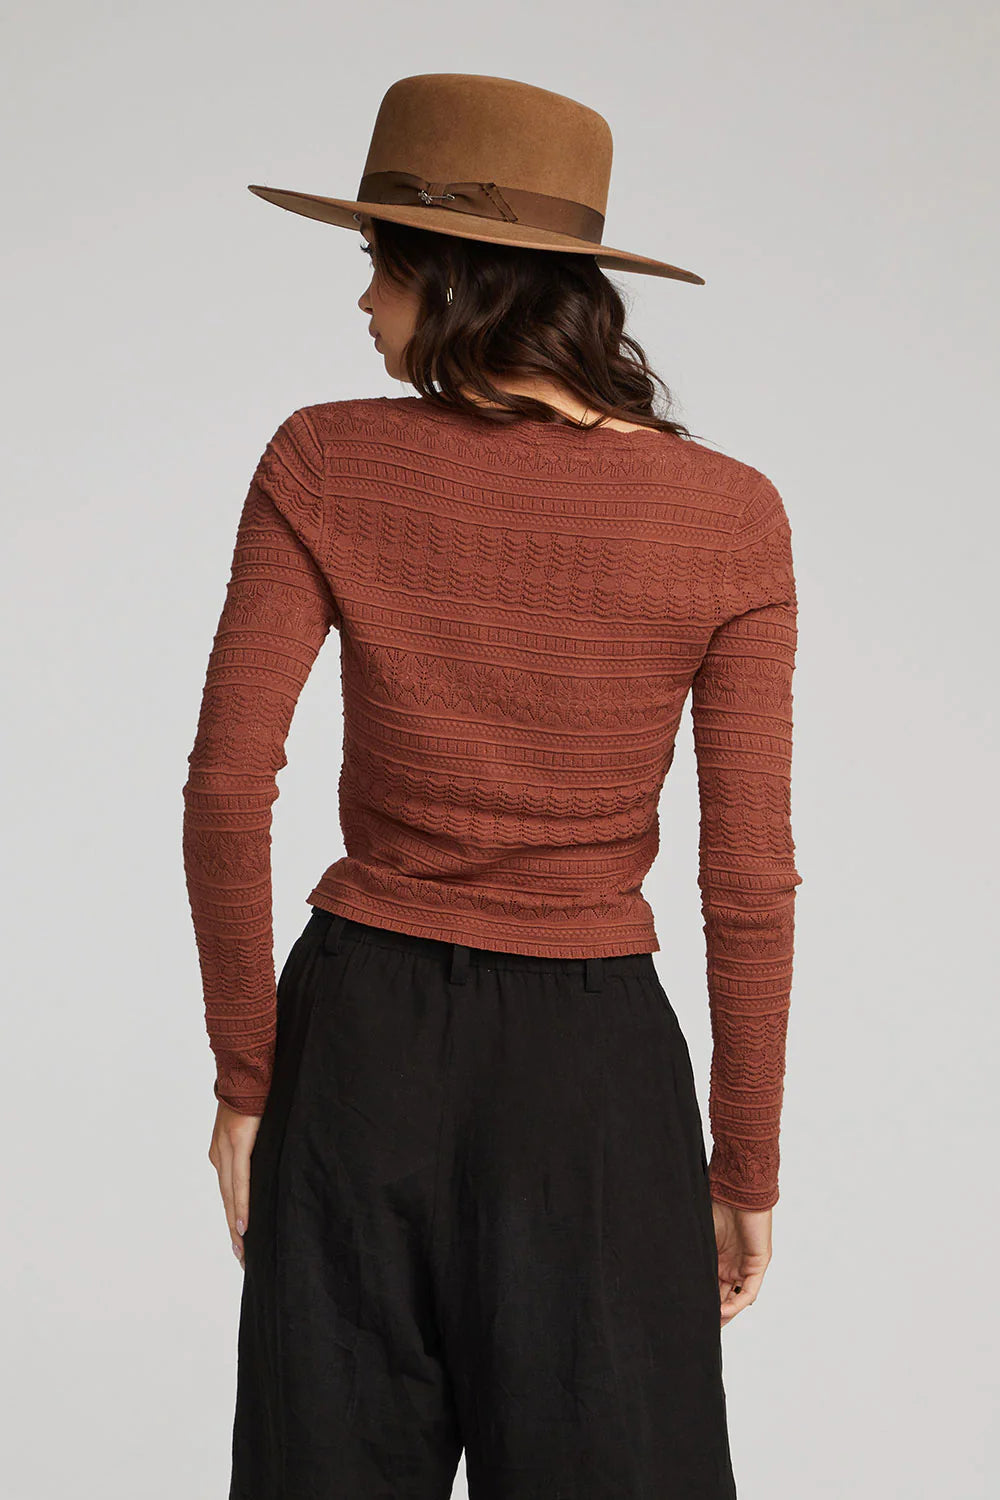 Pointelle Square Neck Sweater